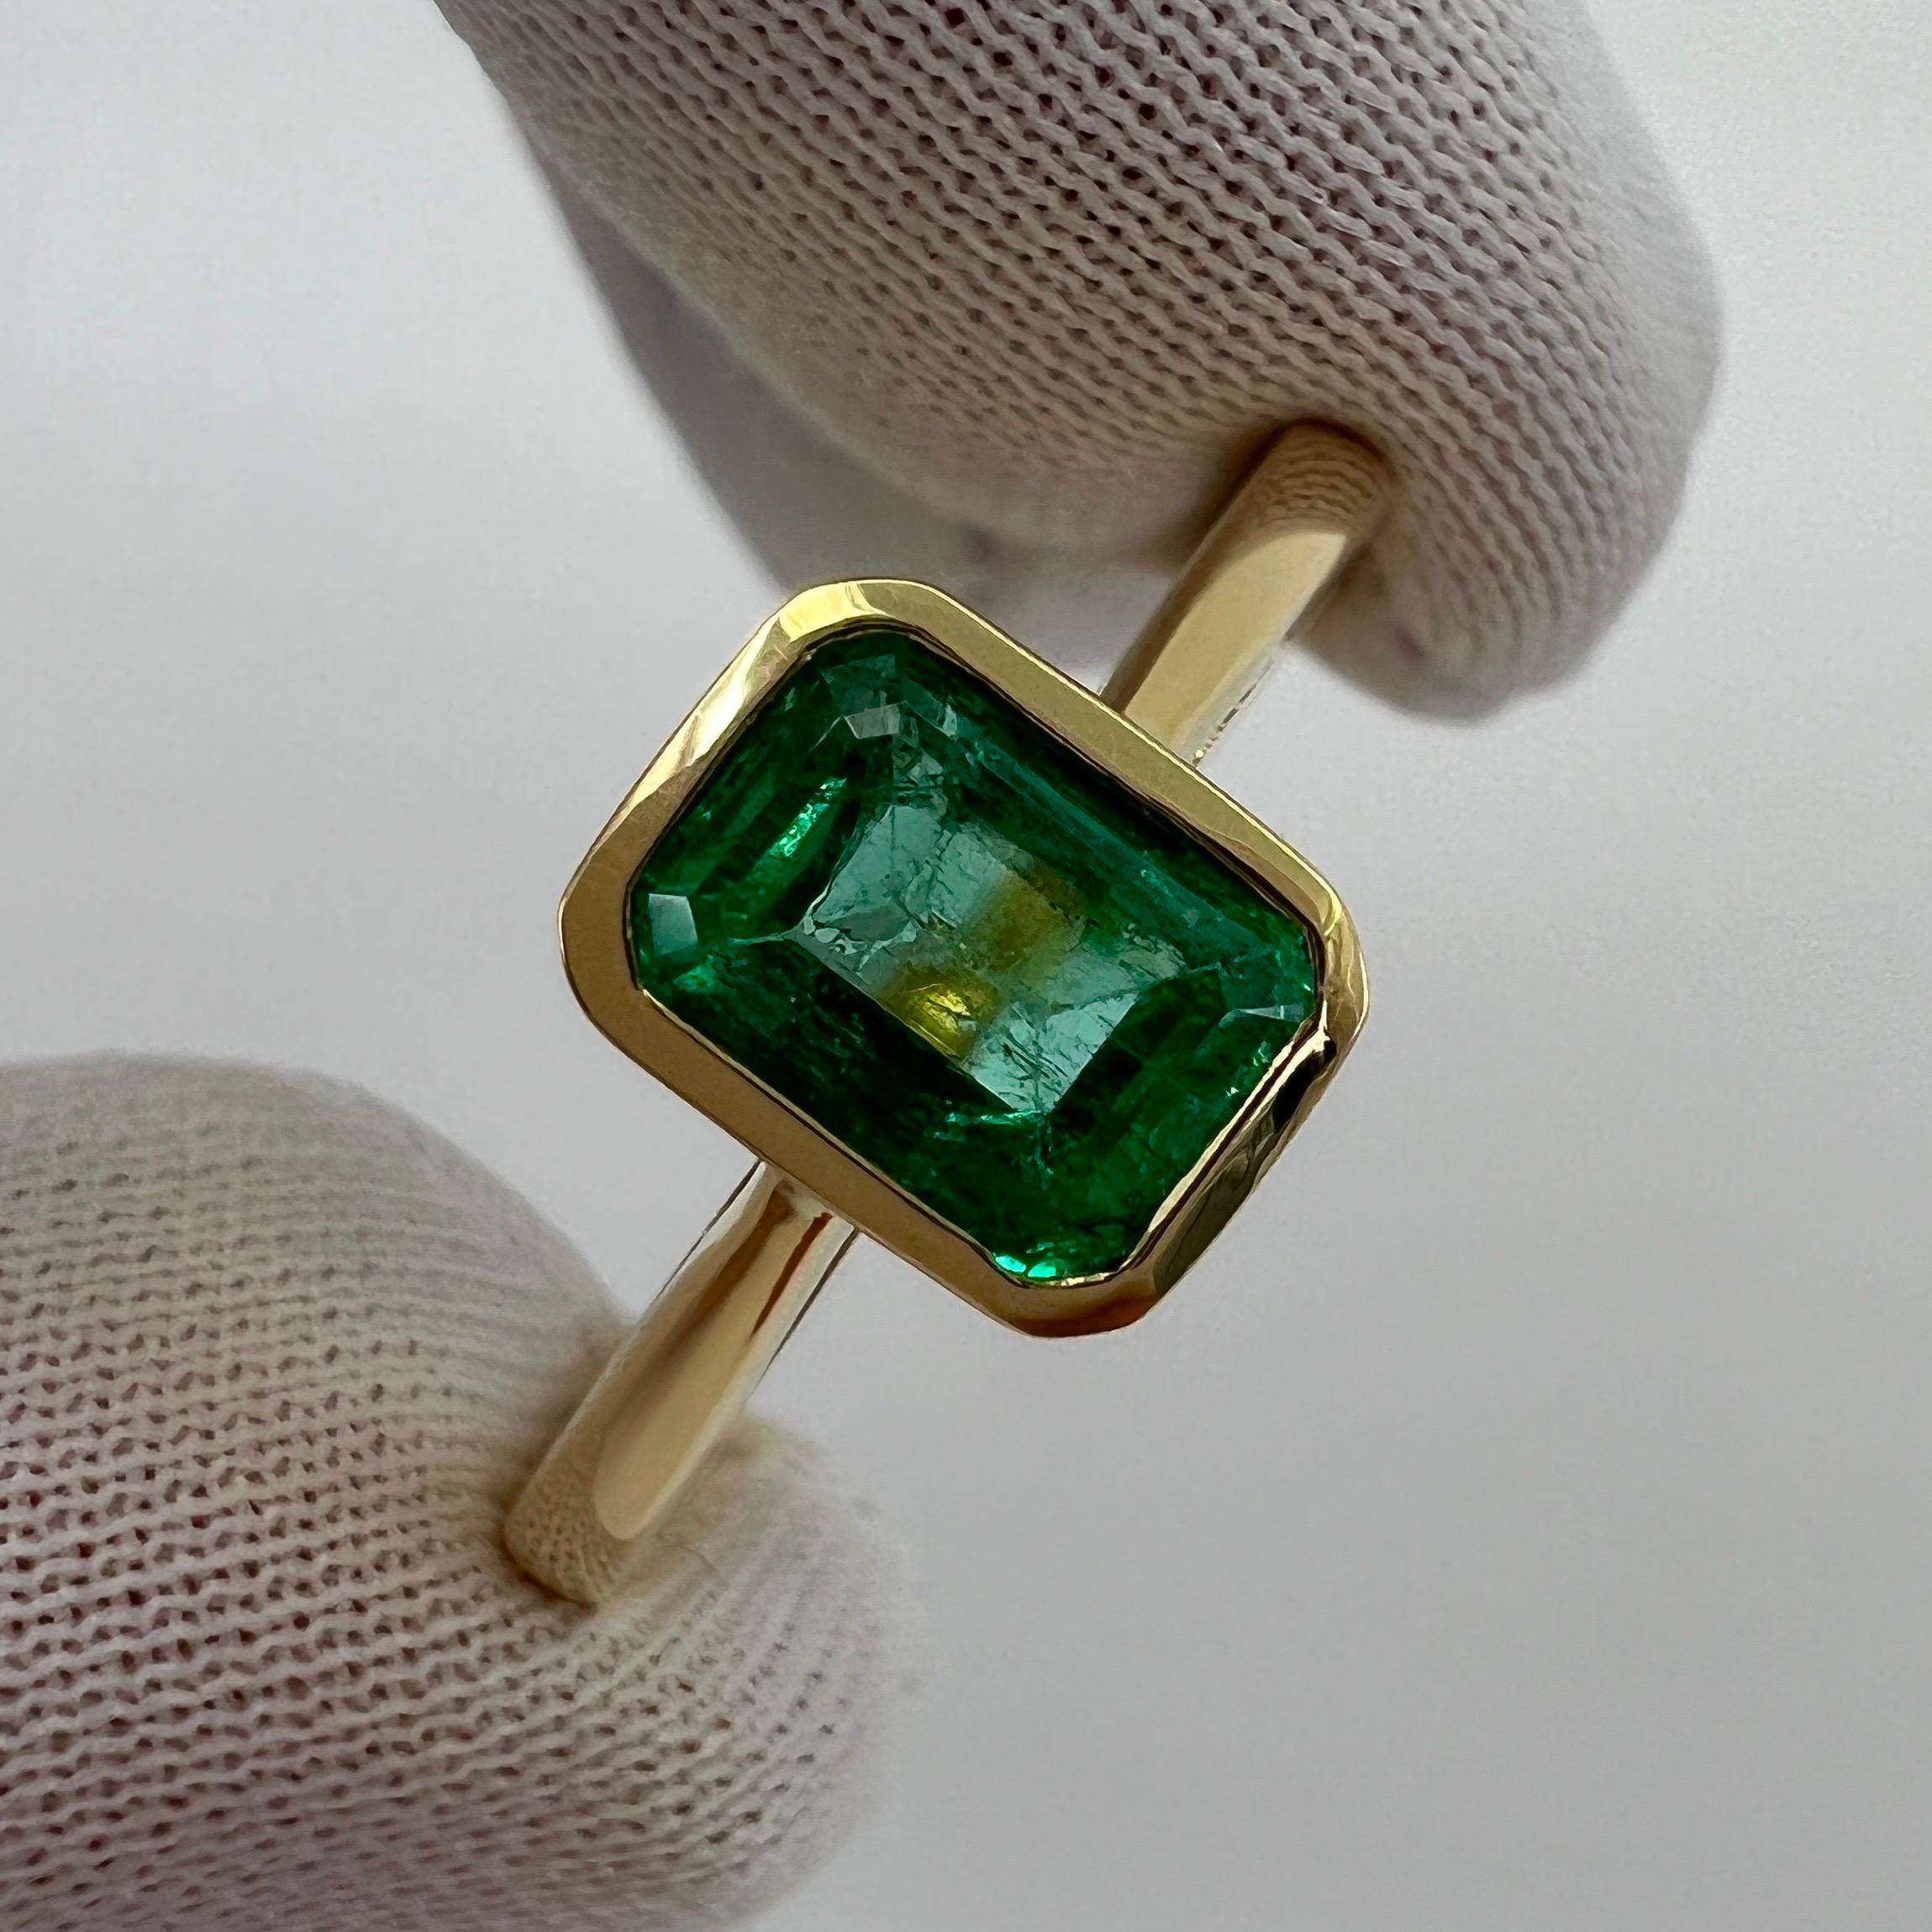 GIA Certified Vivid Green 1.5ct Colombian Emerald 18k Yellow Gold Solitaire Ring 4